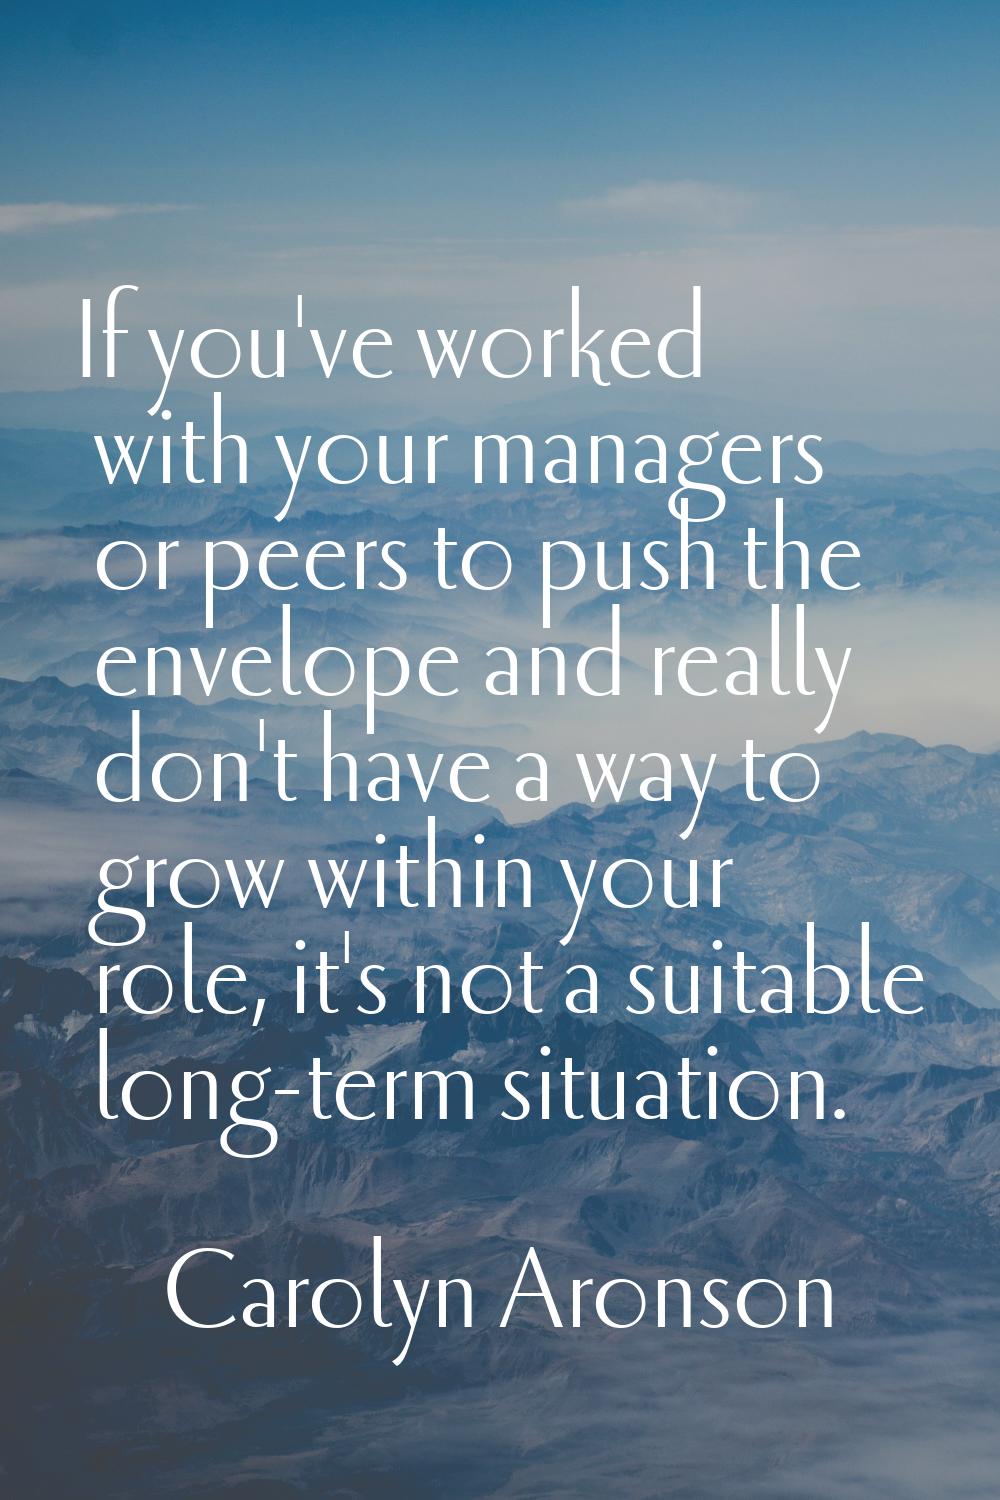 If you've worked with your managers or peers to push the envelope and really don't have a way to gr